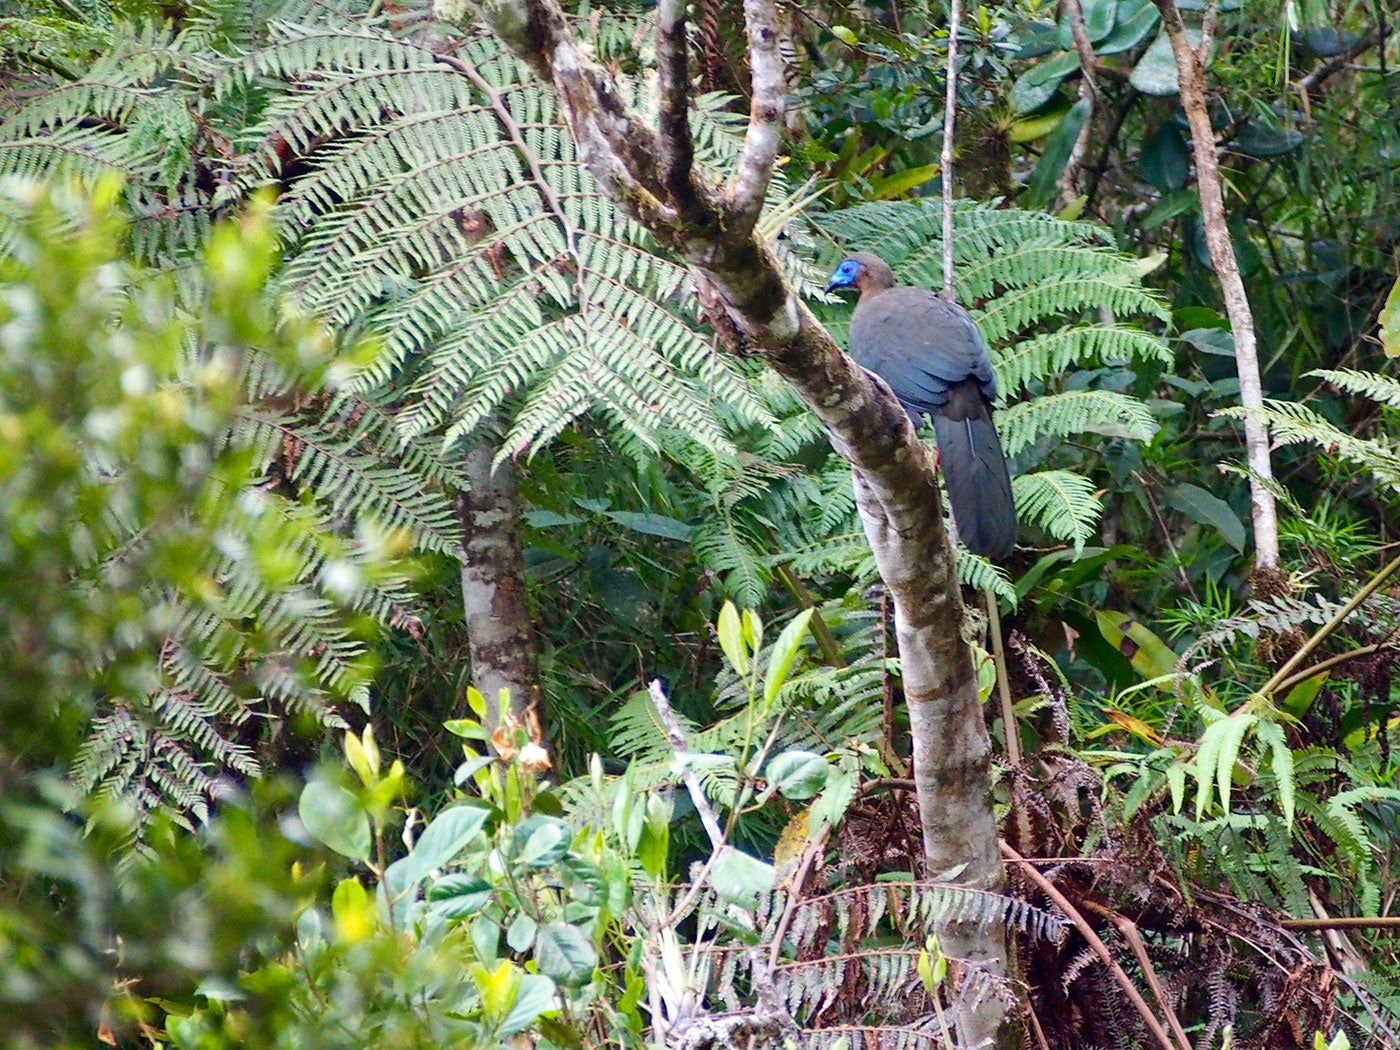 large bird with a long tail perched in the forest